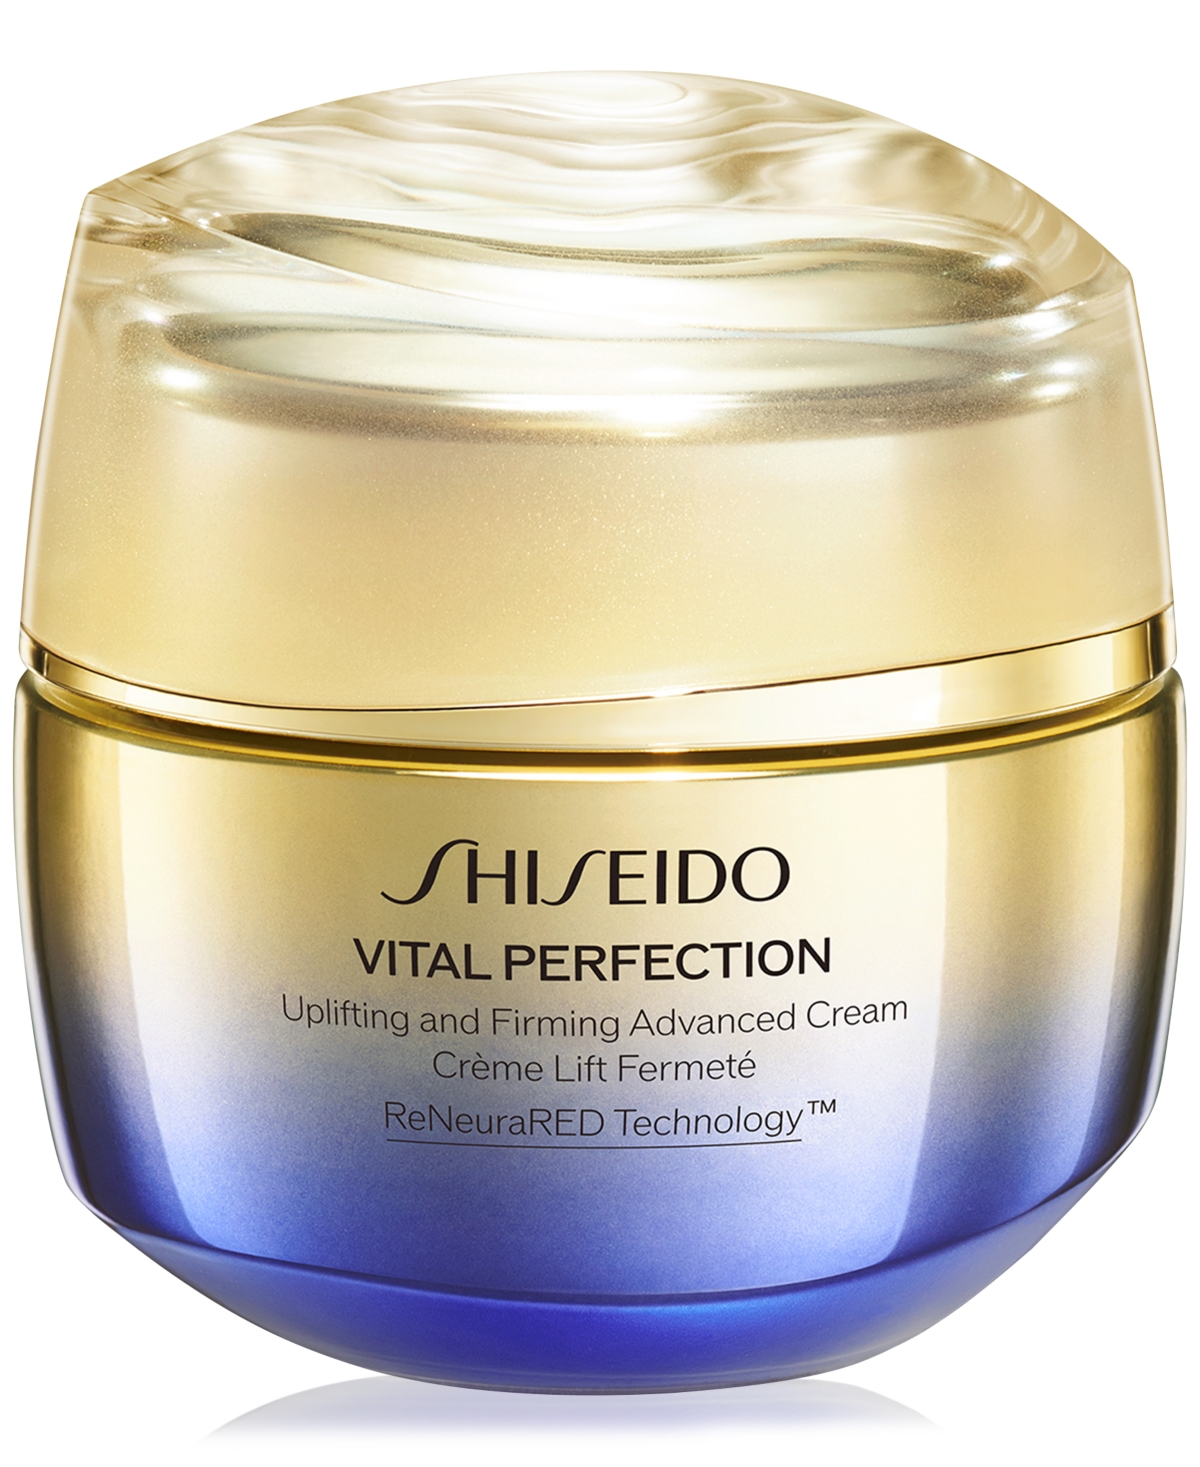 Shiseido Vital Perfection Uplifting & Firming Advanced Cream, 1.7 Oz. In No Color